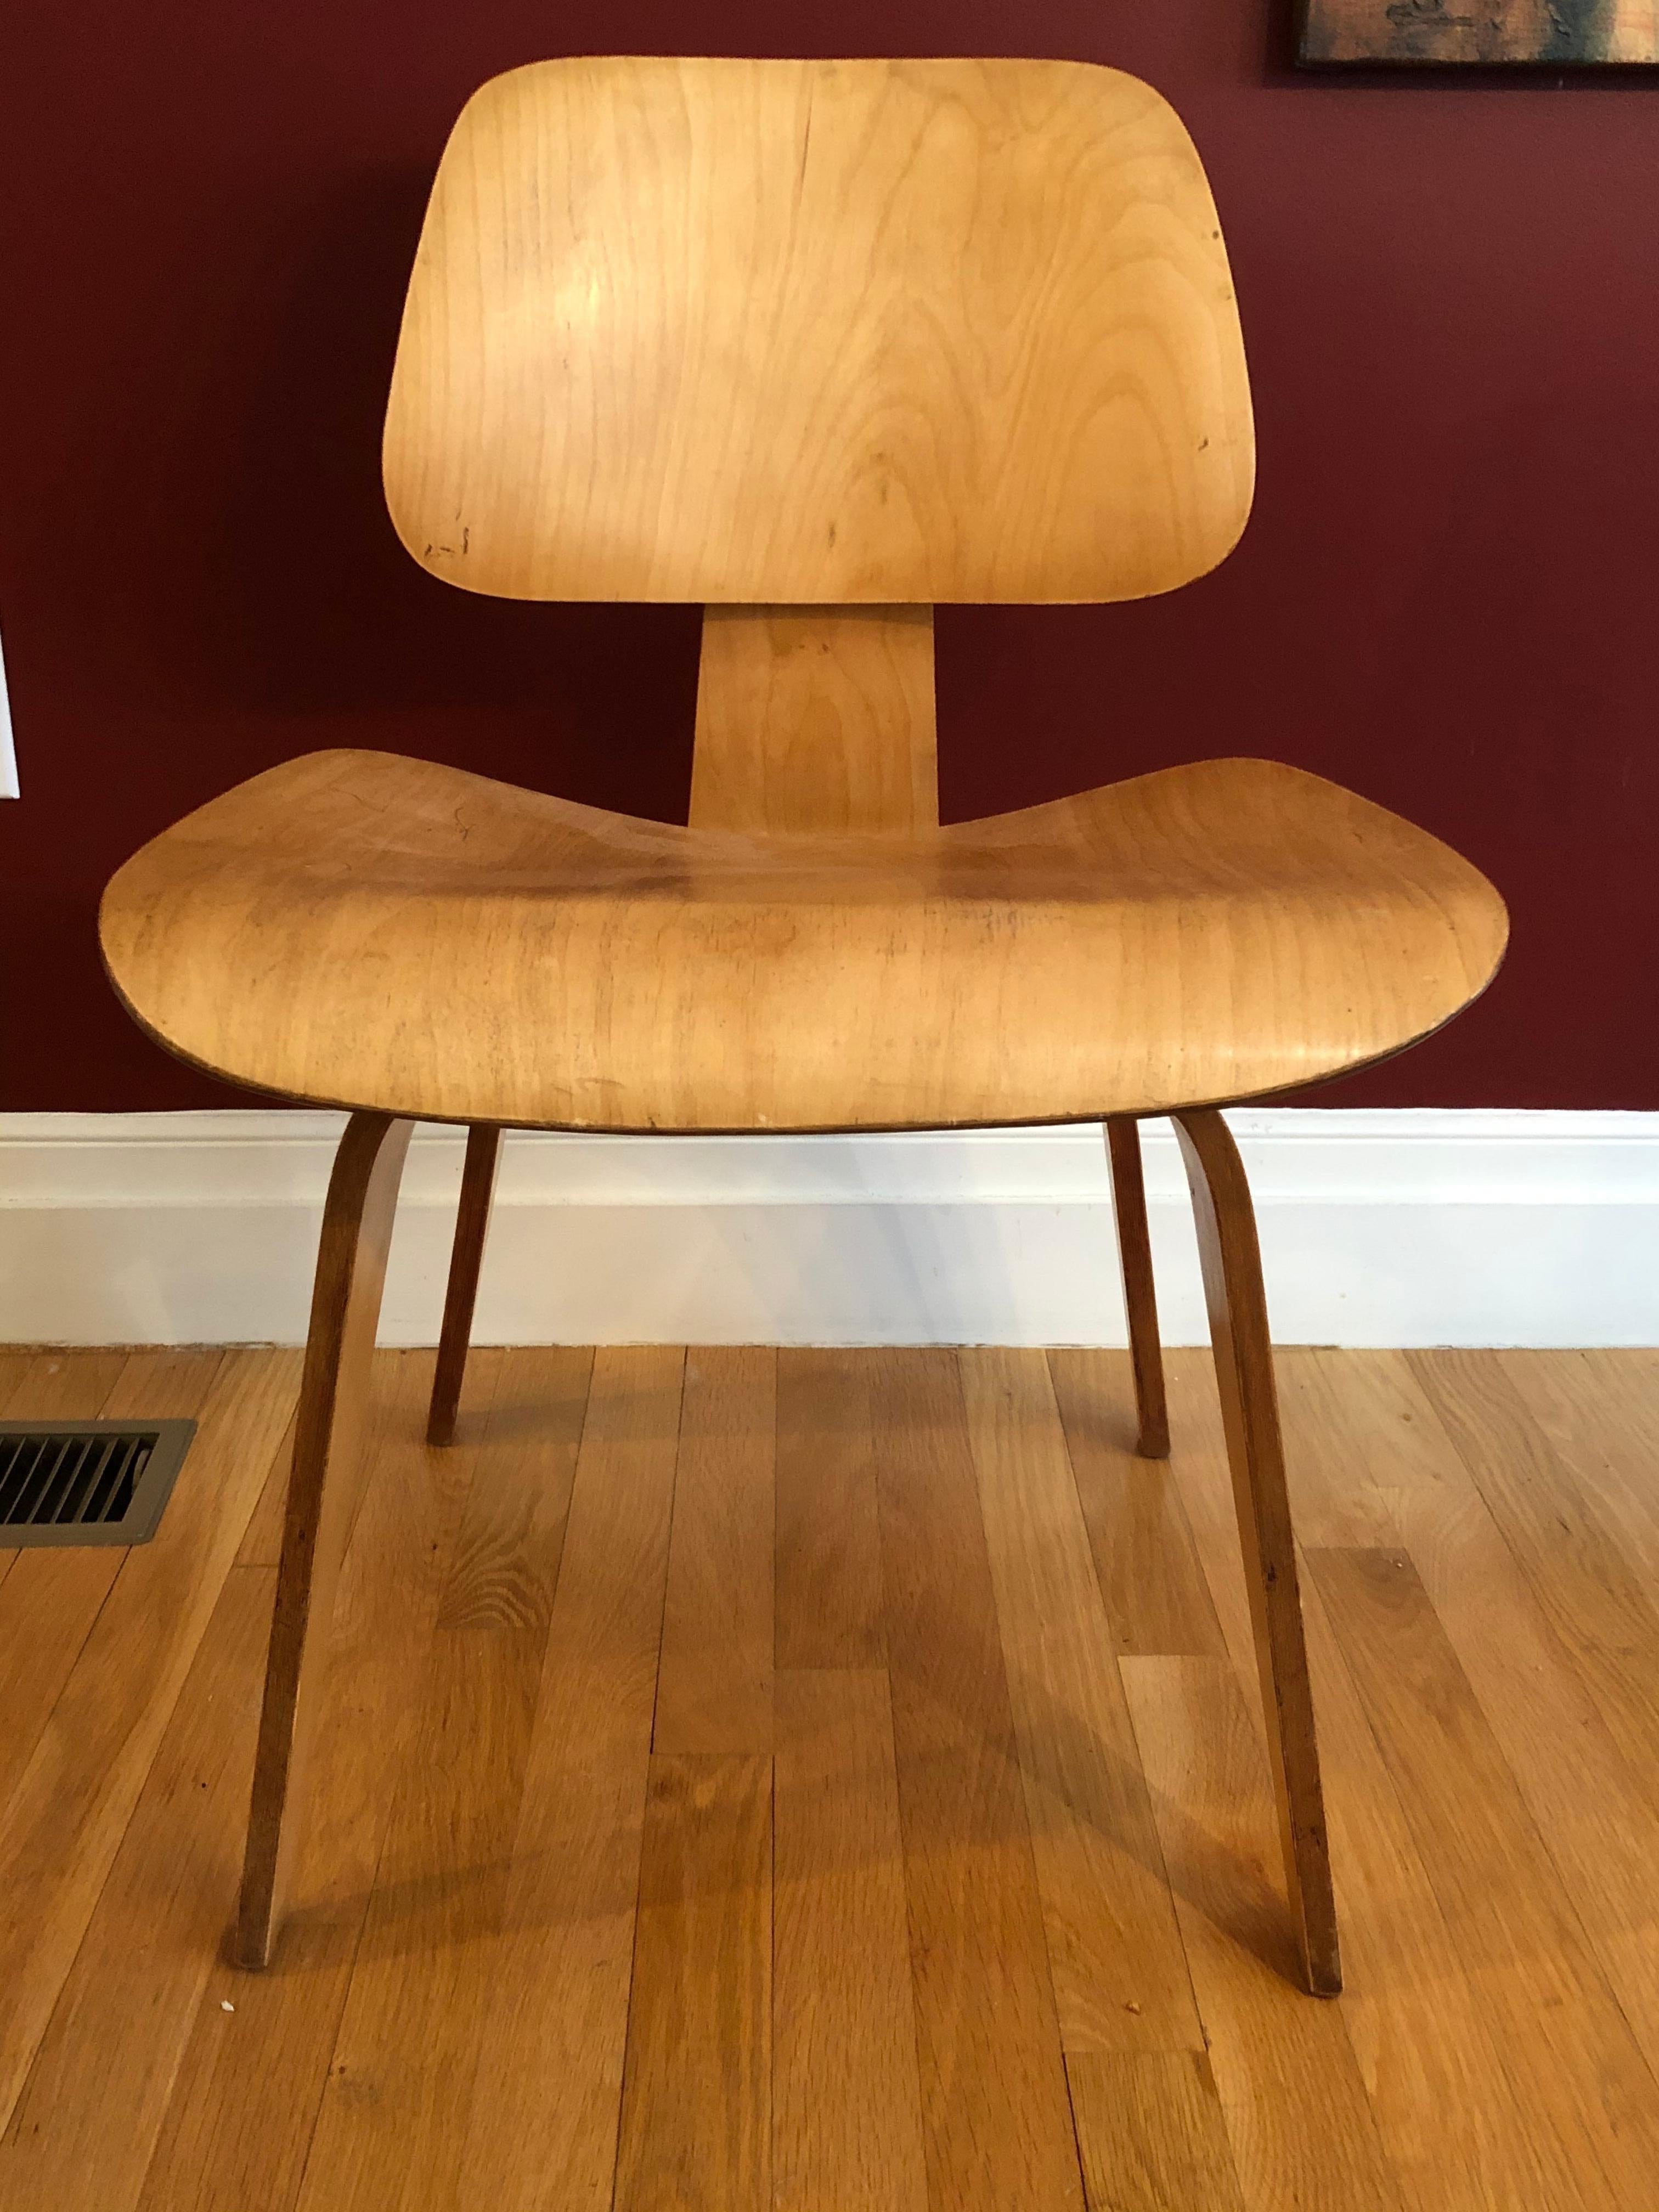 DCW by Charles and Ray Eames for Herman Miller in original condition. Legs attached with 5/2/4 screw configuration. Original patina.